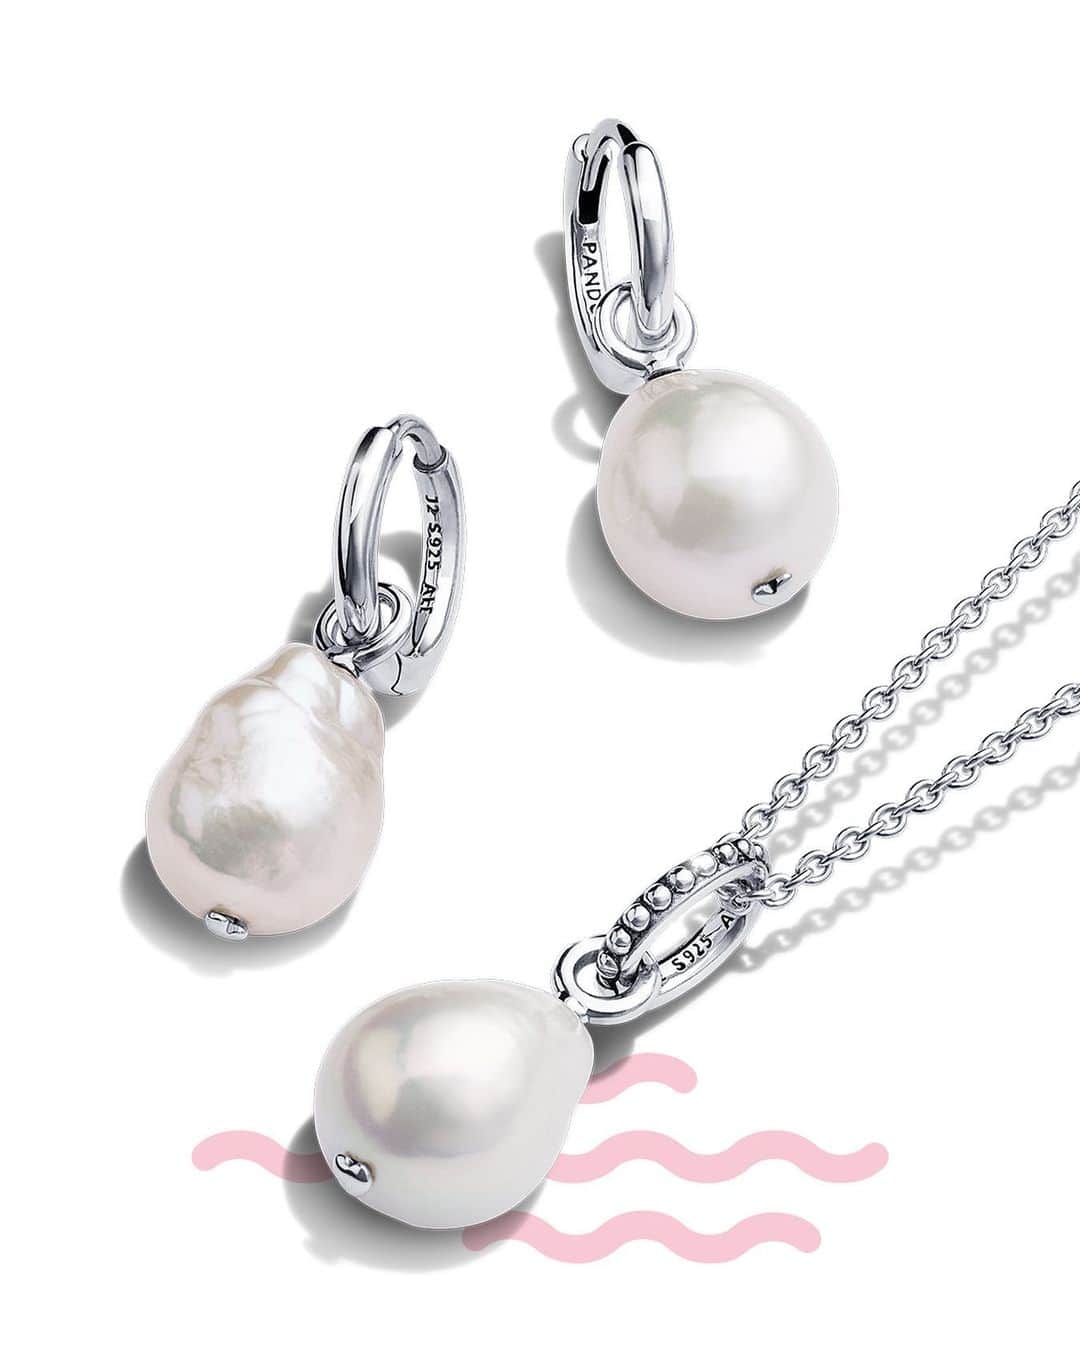 PANDORAのインスタグラム：「Natural, organic, cool. Give another meaning to pearly whites with one-of-a-kind Baroque pearl pieces designed with simplicity in mind. 💯#PandoraOcean #PandoraStyle #Summer」